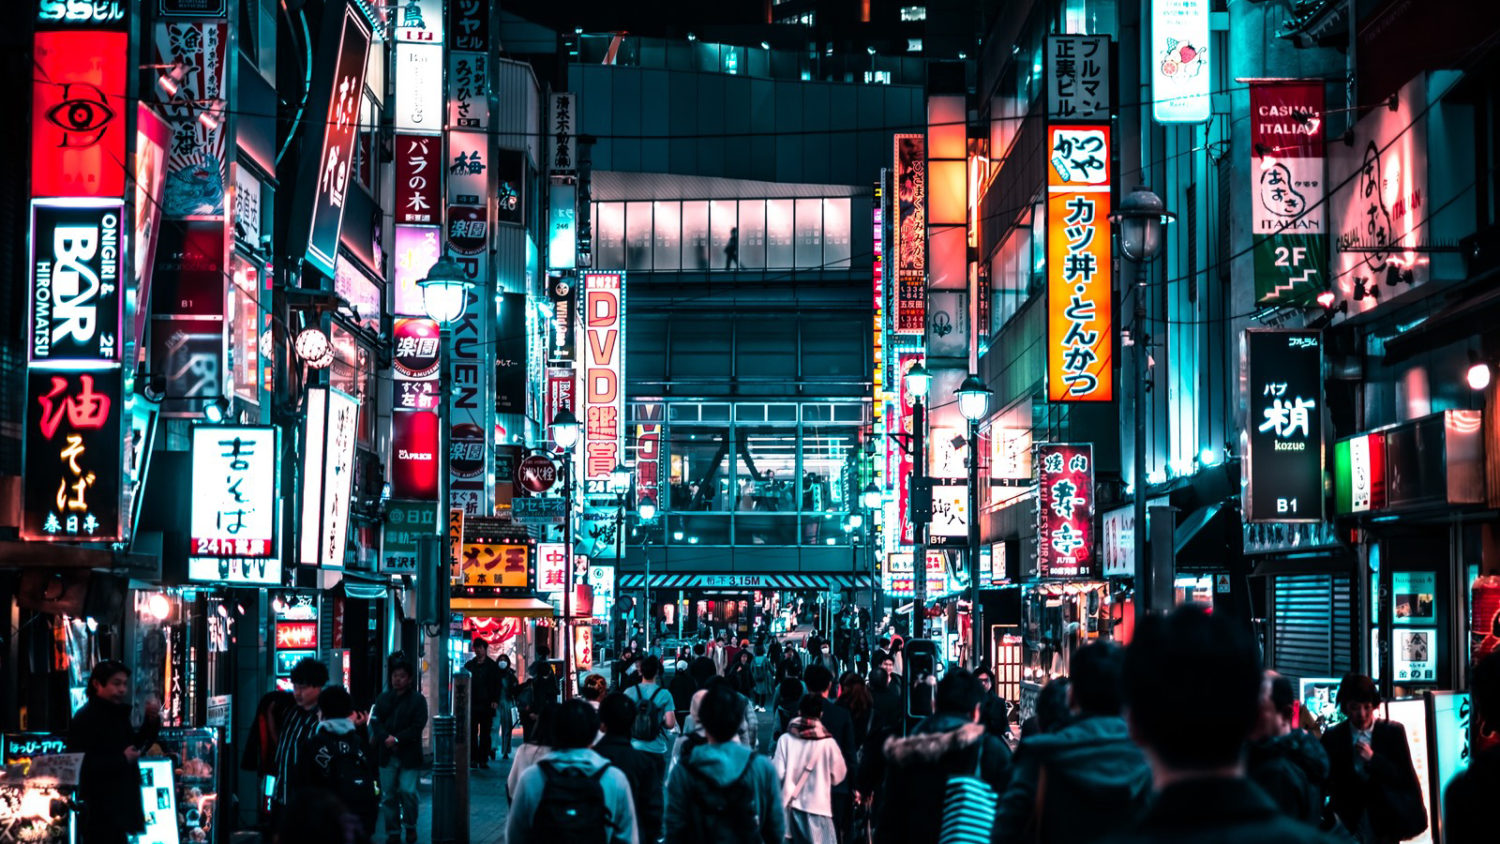 Night view of a crowded Tokyo street with many illuminated signs.